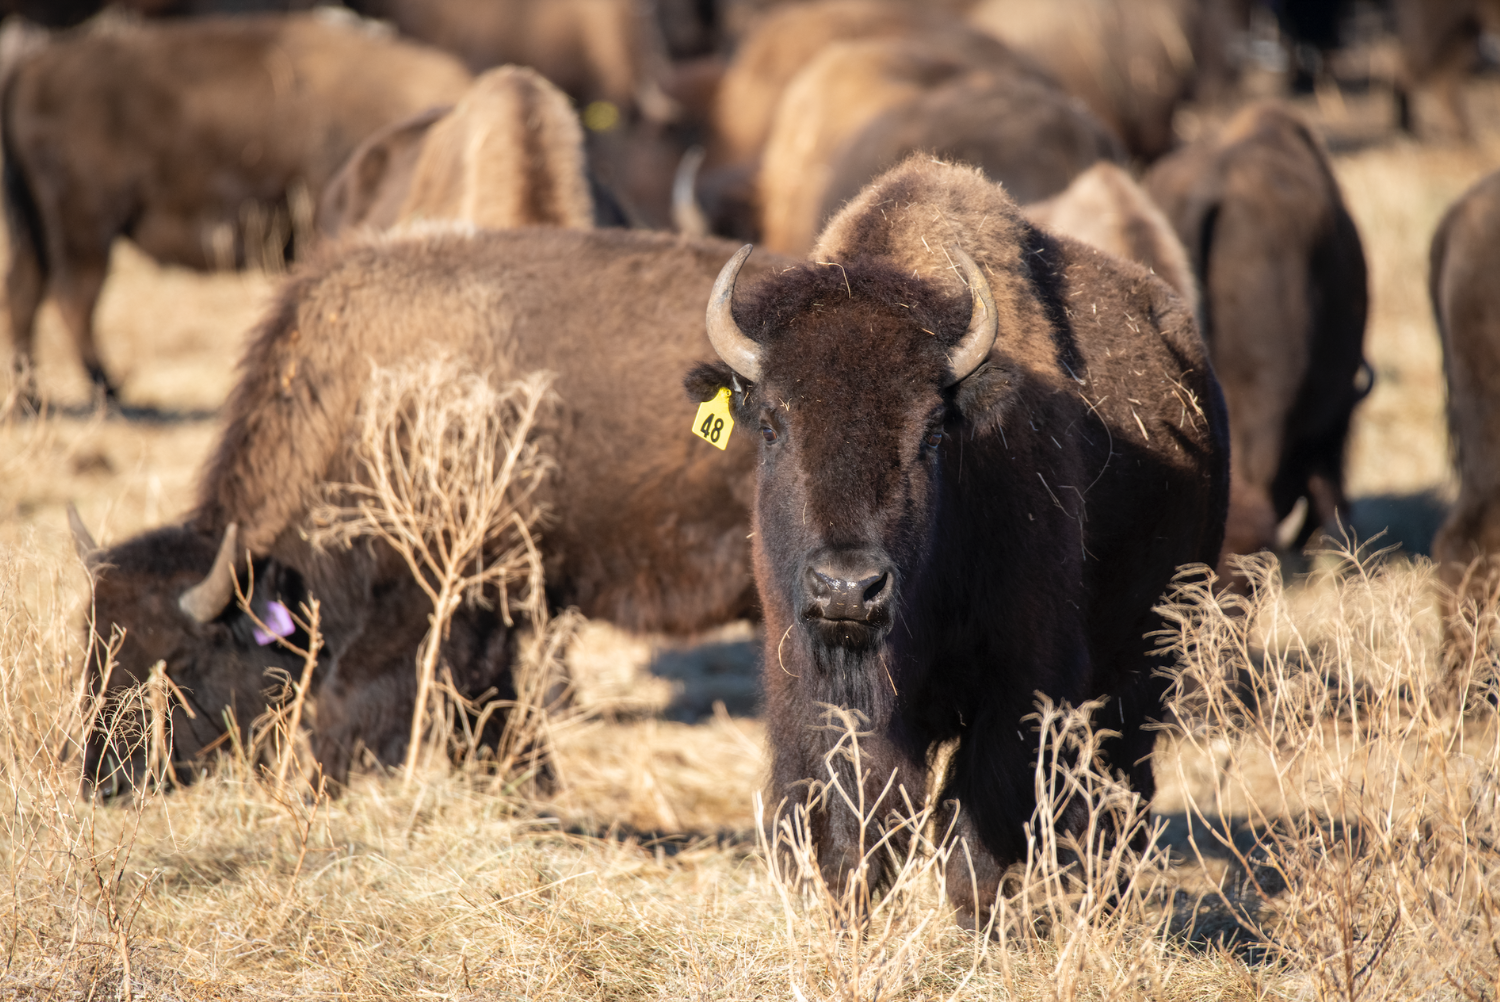 Long shot of a Plains Bison herd at the Wolakota Bison Release, Rosebud-Sioux Reservation, South Dakota, 10/30/2020. An image from the day of the first release of bison into the Wolakota Buffalo Range, on the Rosebud Reservation, South Dakota. The range will become the largest Native owned and managed bison herd in North America. Yellow tagged animals originated in Badlands National Park and Purple tags are from Theodore Roosevelt National Park. Bison facing the camera in the middle of the shot has a yellow 48 ear tag.